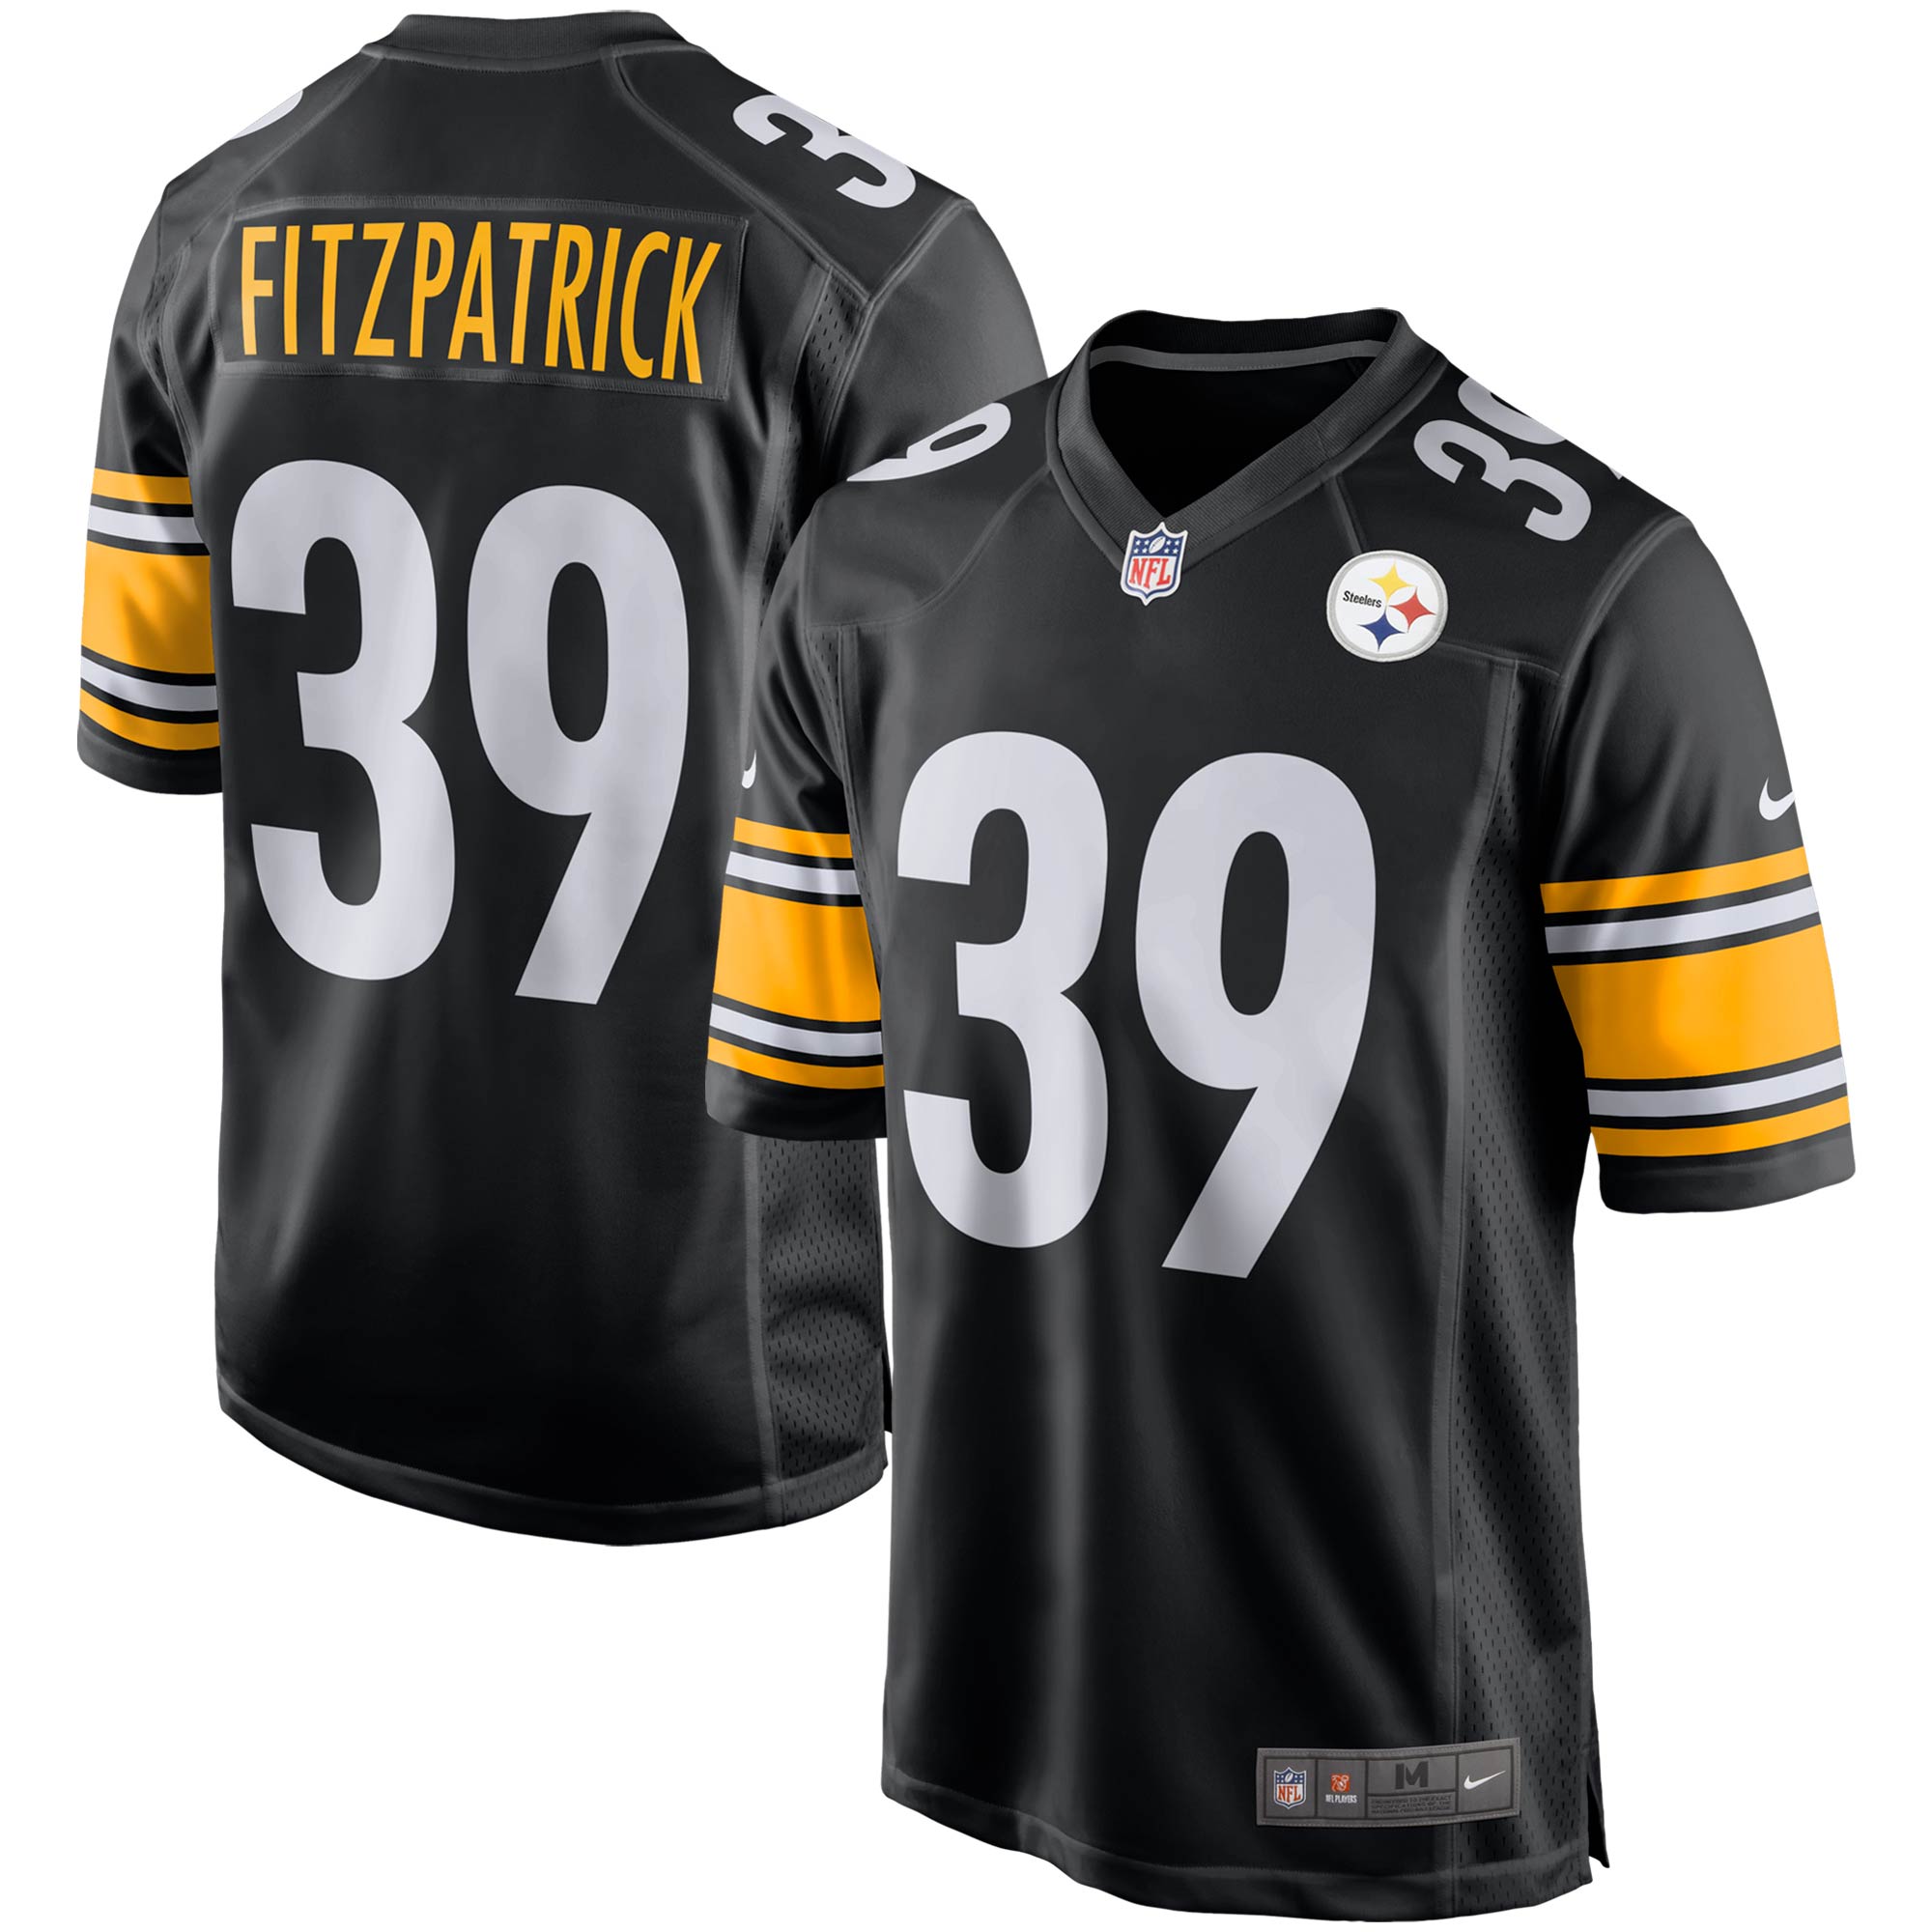 Jersey Game Steelers Fitzpatrick TC Adulto